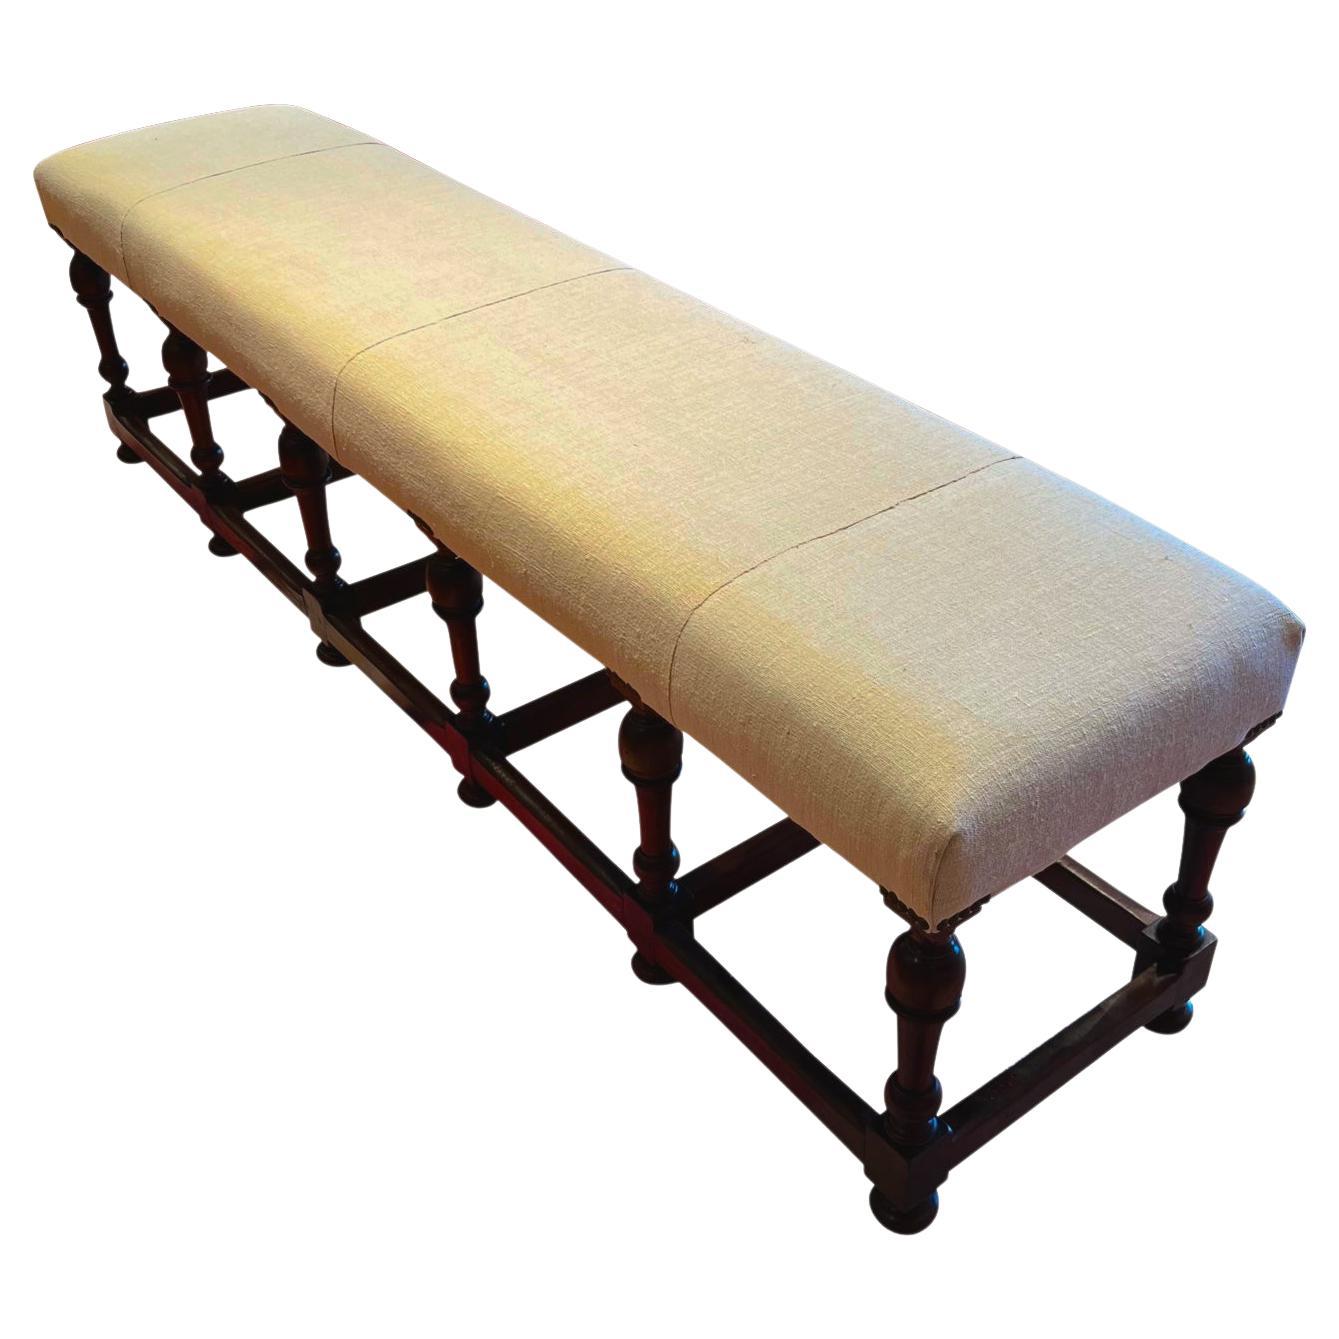 Linen Upholstery Extra Long Turned Leg Bench, Italy, 19th Century